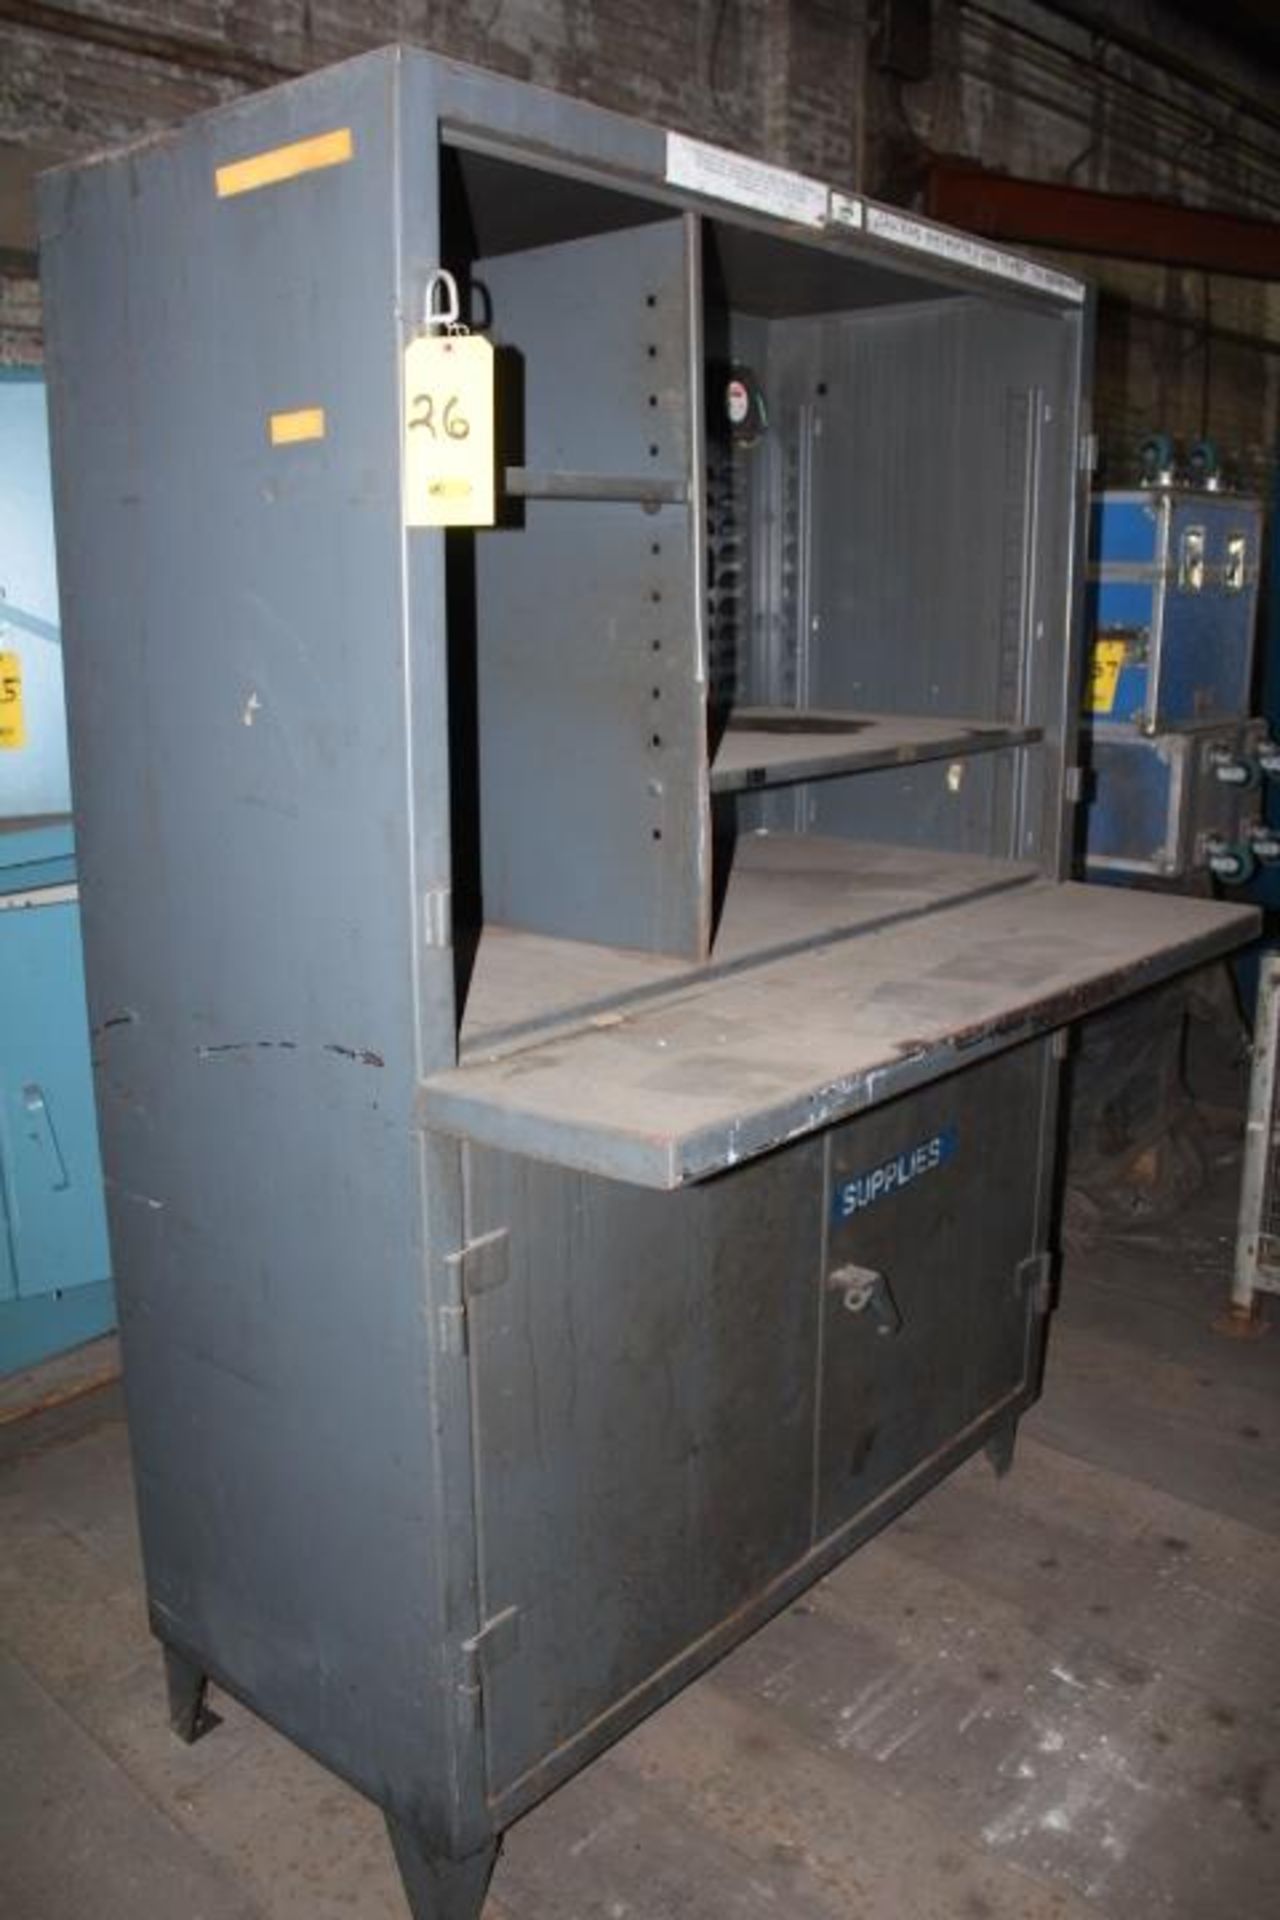 LARGE STORAGE CABINET WITH OPEN SHELVES, SUPPLY UNDERSTORAGE AND WORK SHELF